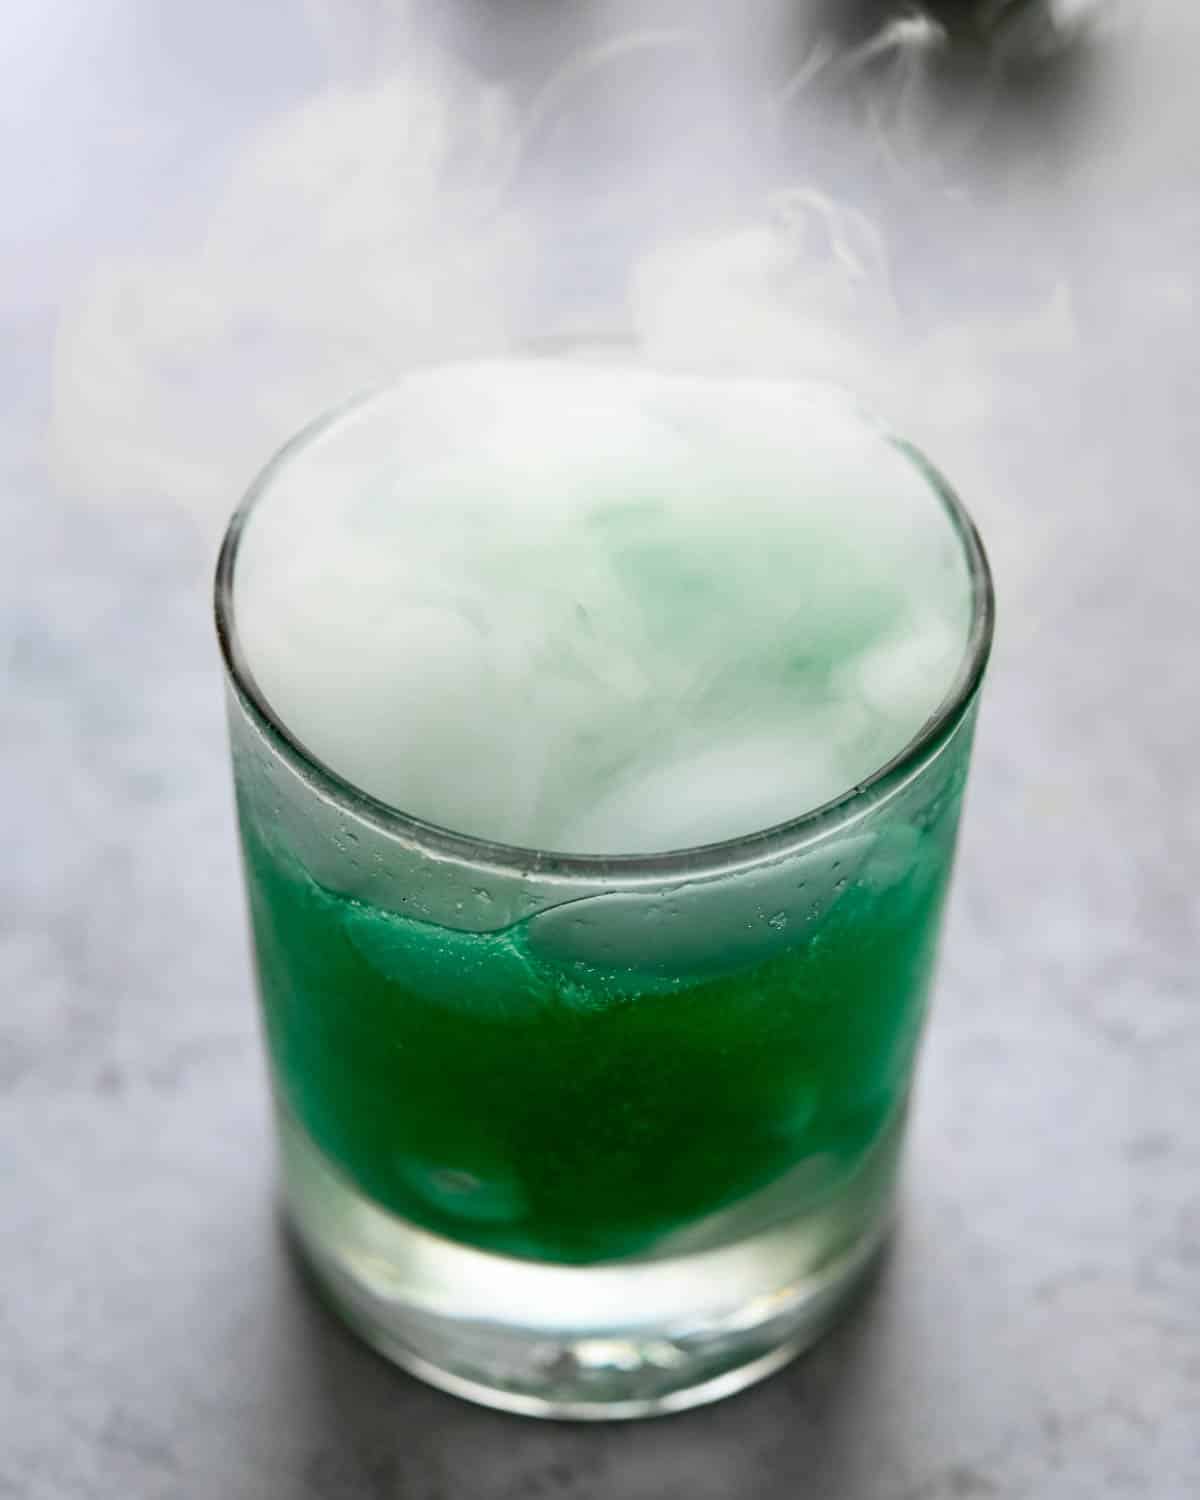 Adding dry ice to a cocktail glass and watching it smoke.